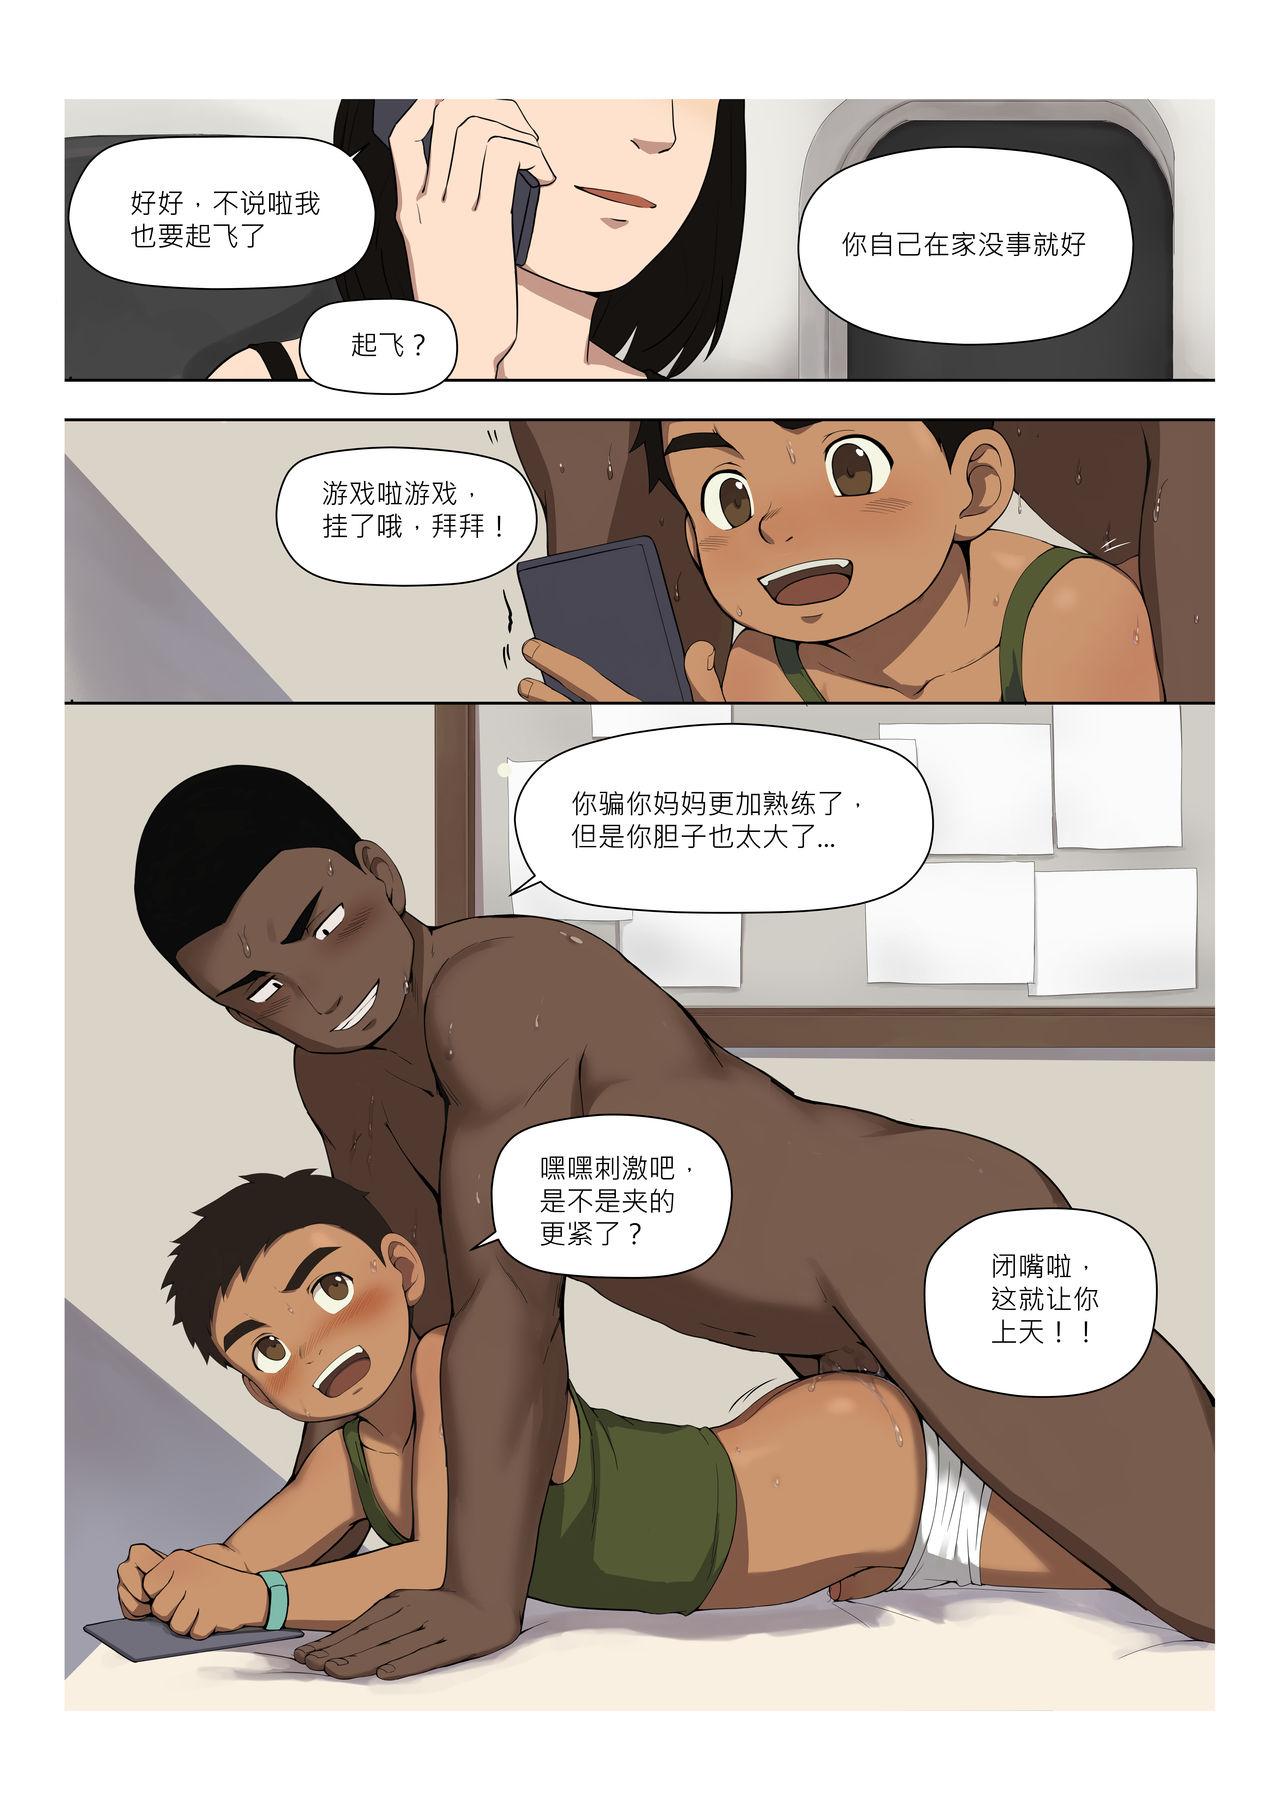 Gay Reality Reap What You Sow - 自业自得 Model - Page 42